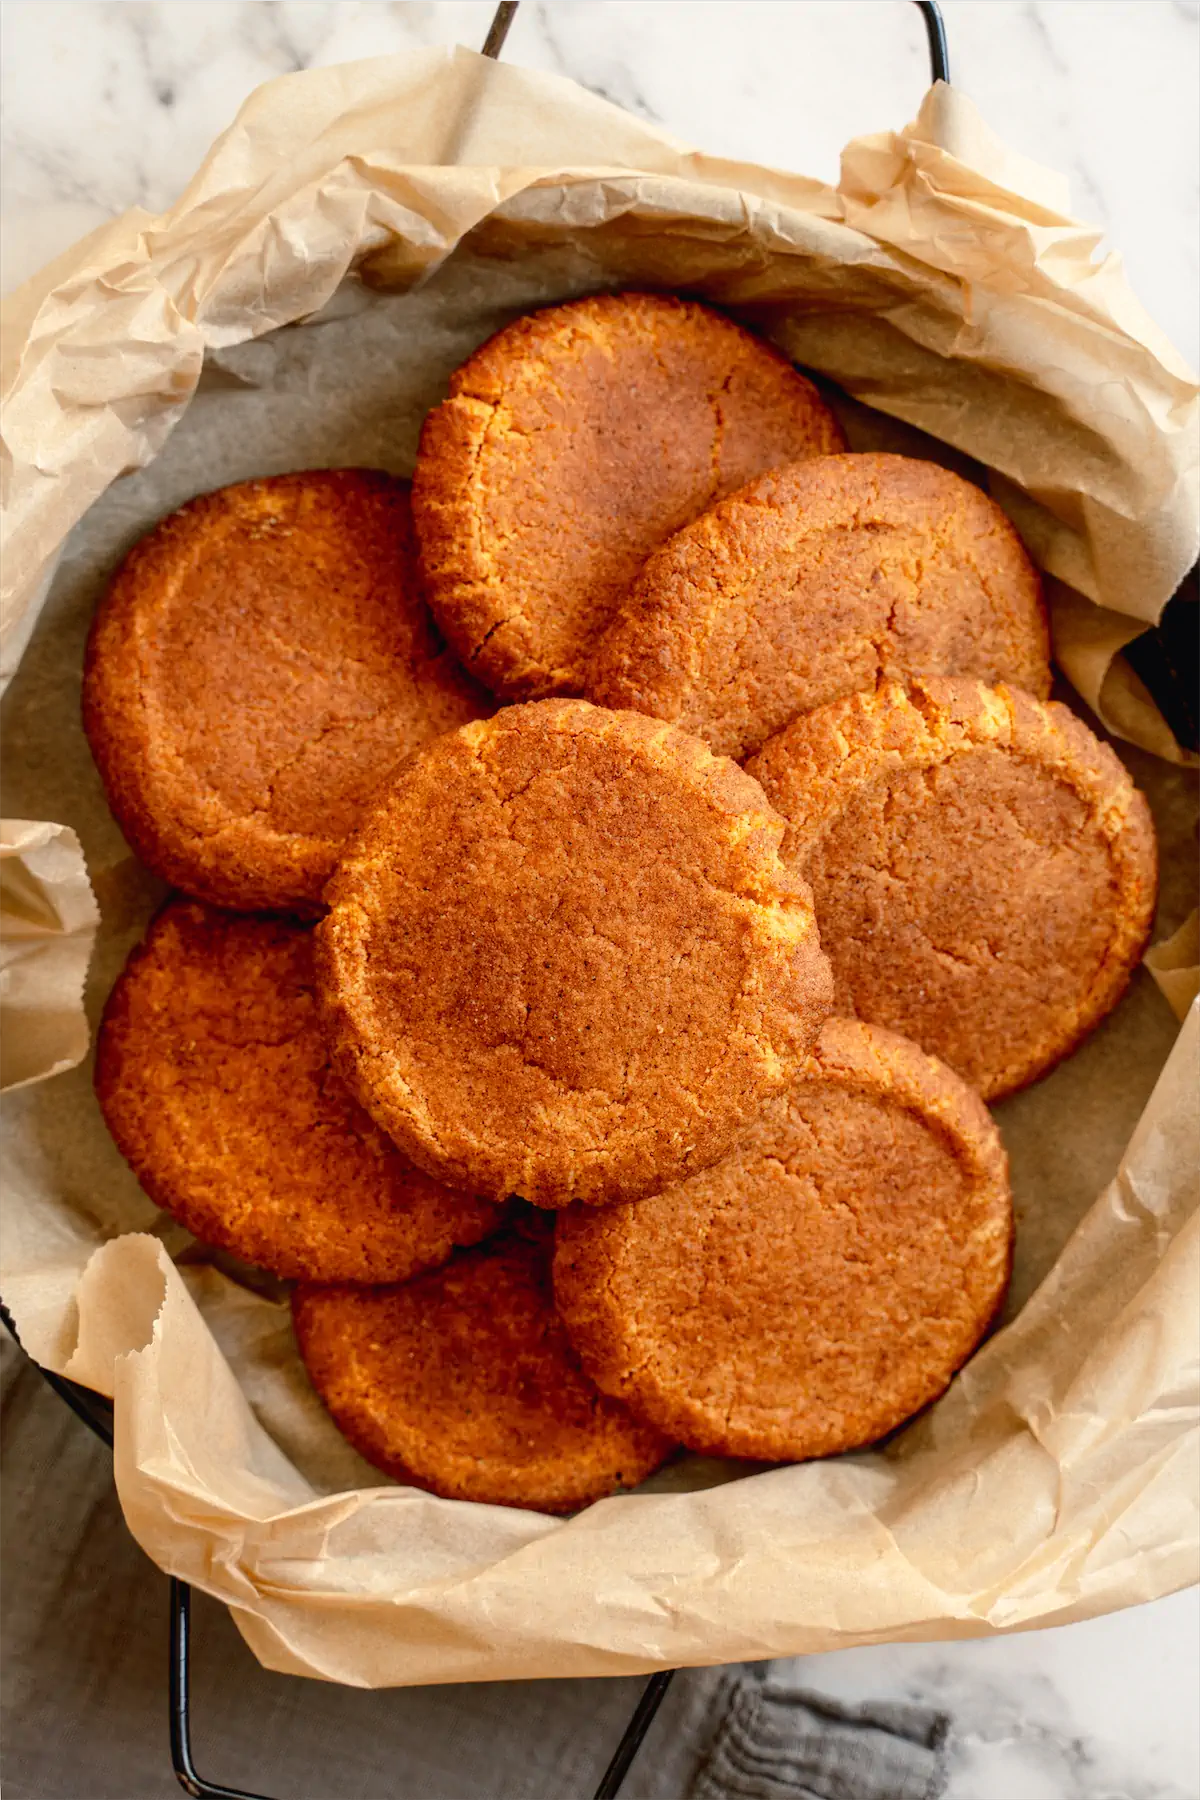 Freshly baked sugar-free snickerdoodles arranged on a deep skillet lined with parchment paper.